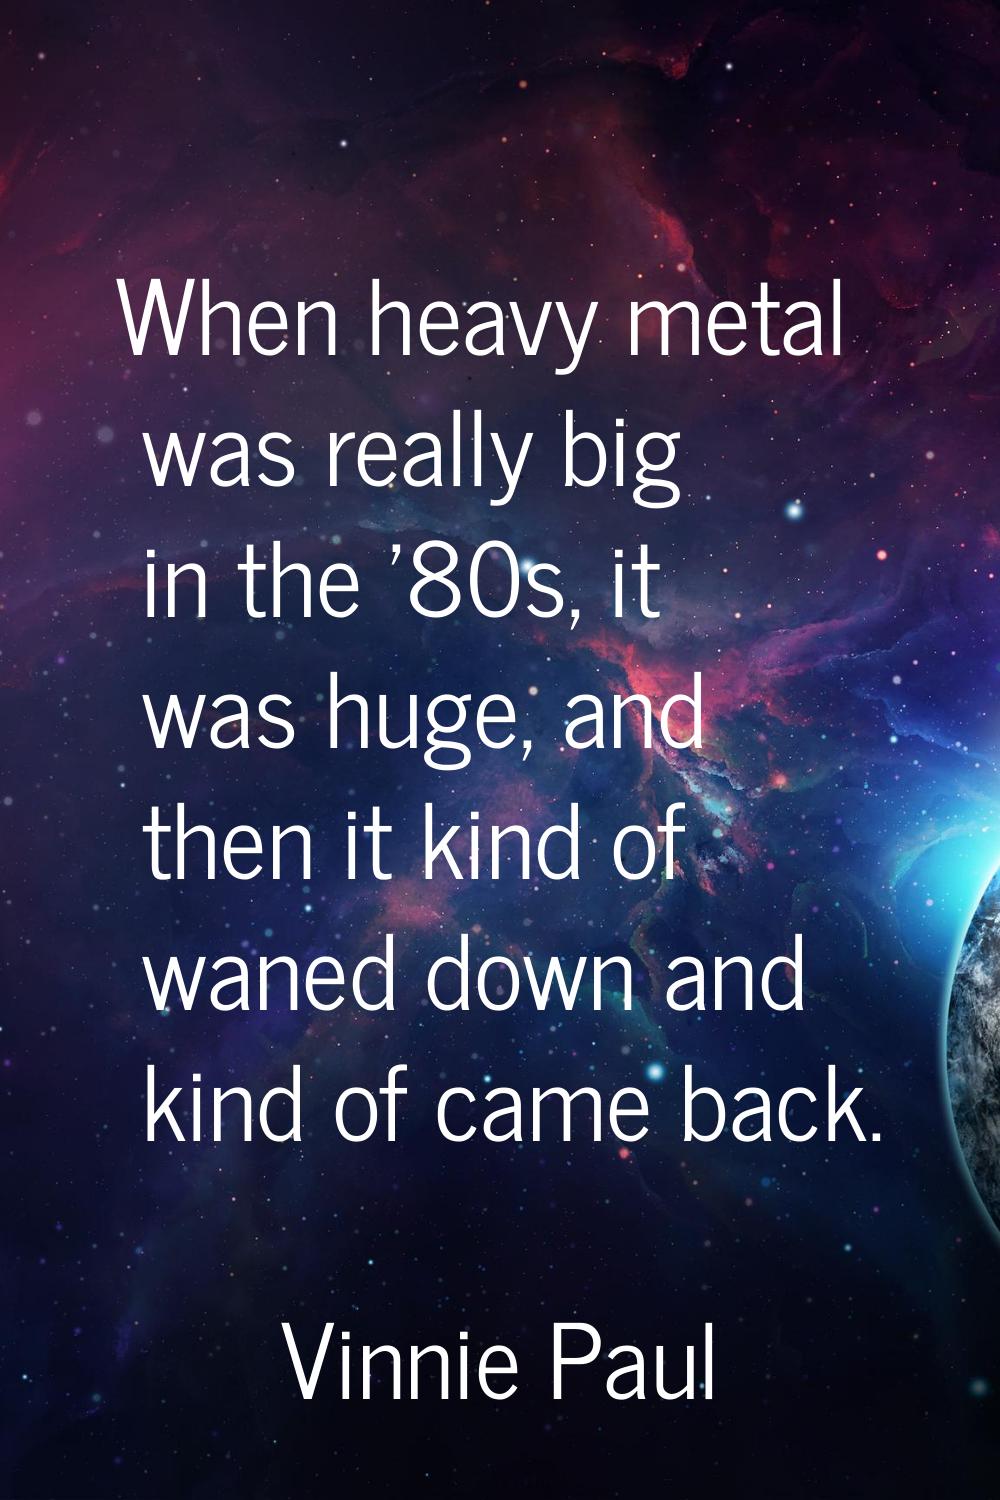 When heavy metal was really big in the '80s, it was huge, and then it kind of waned down and kind o